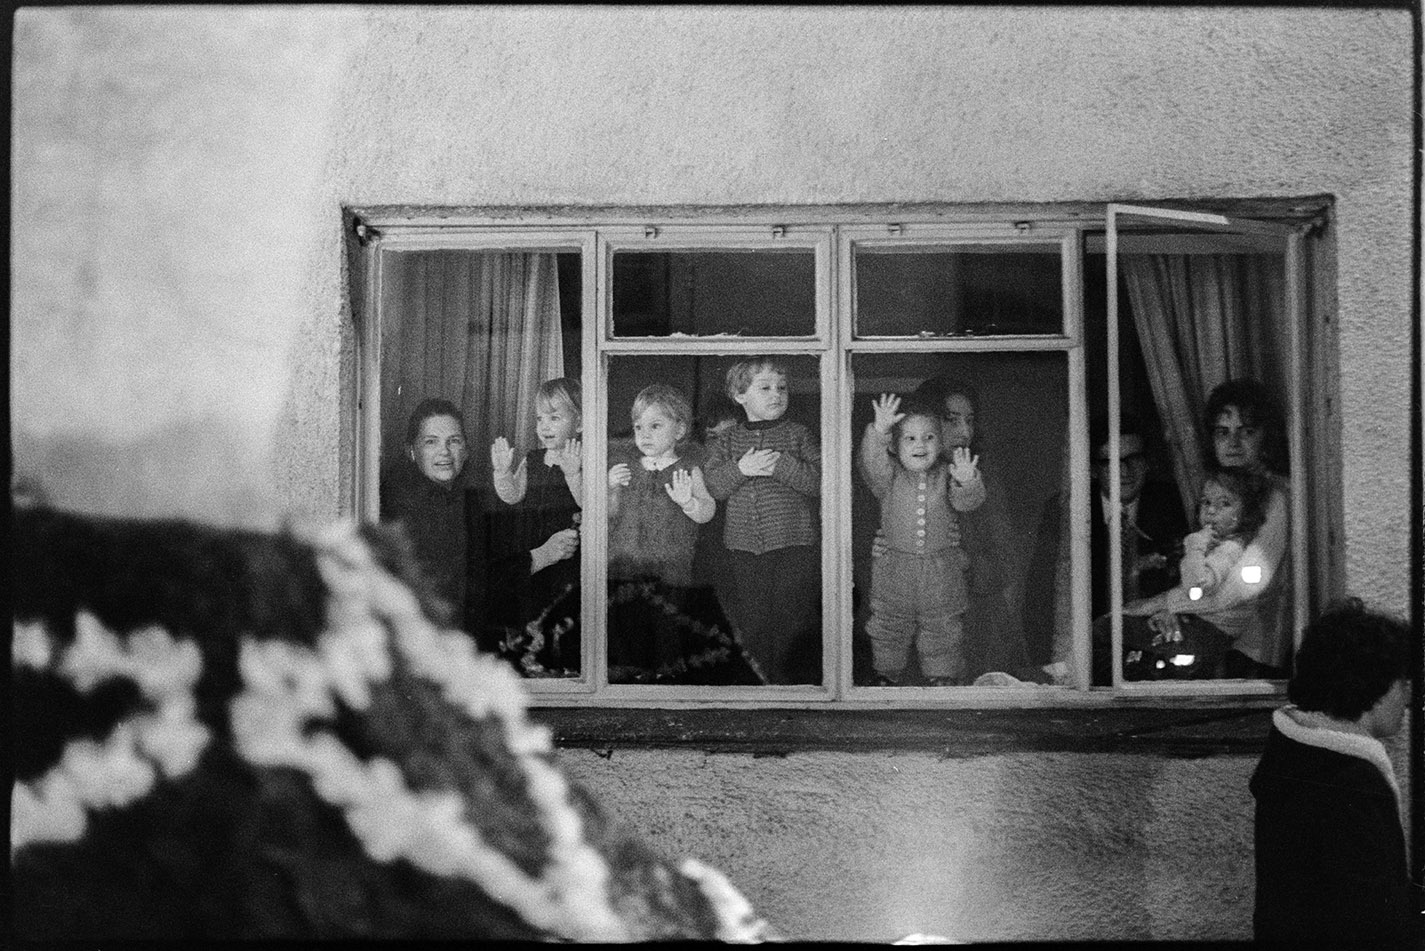 People watching night procession from window, Hatherleigh, 6 November 1974